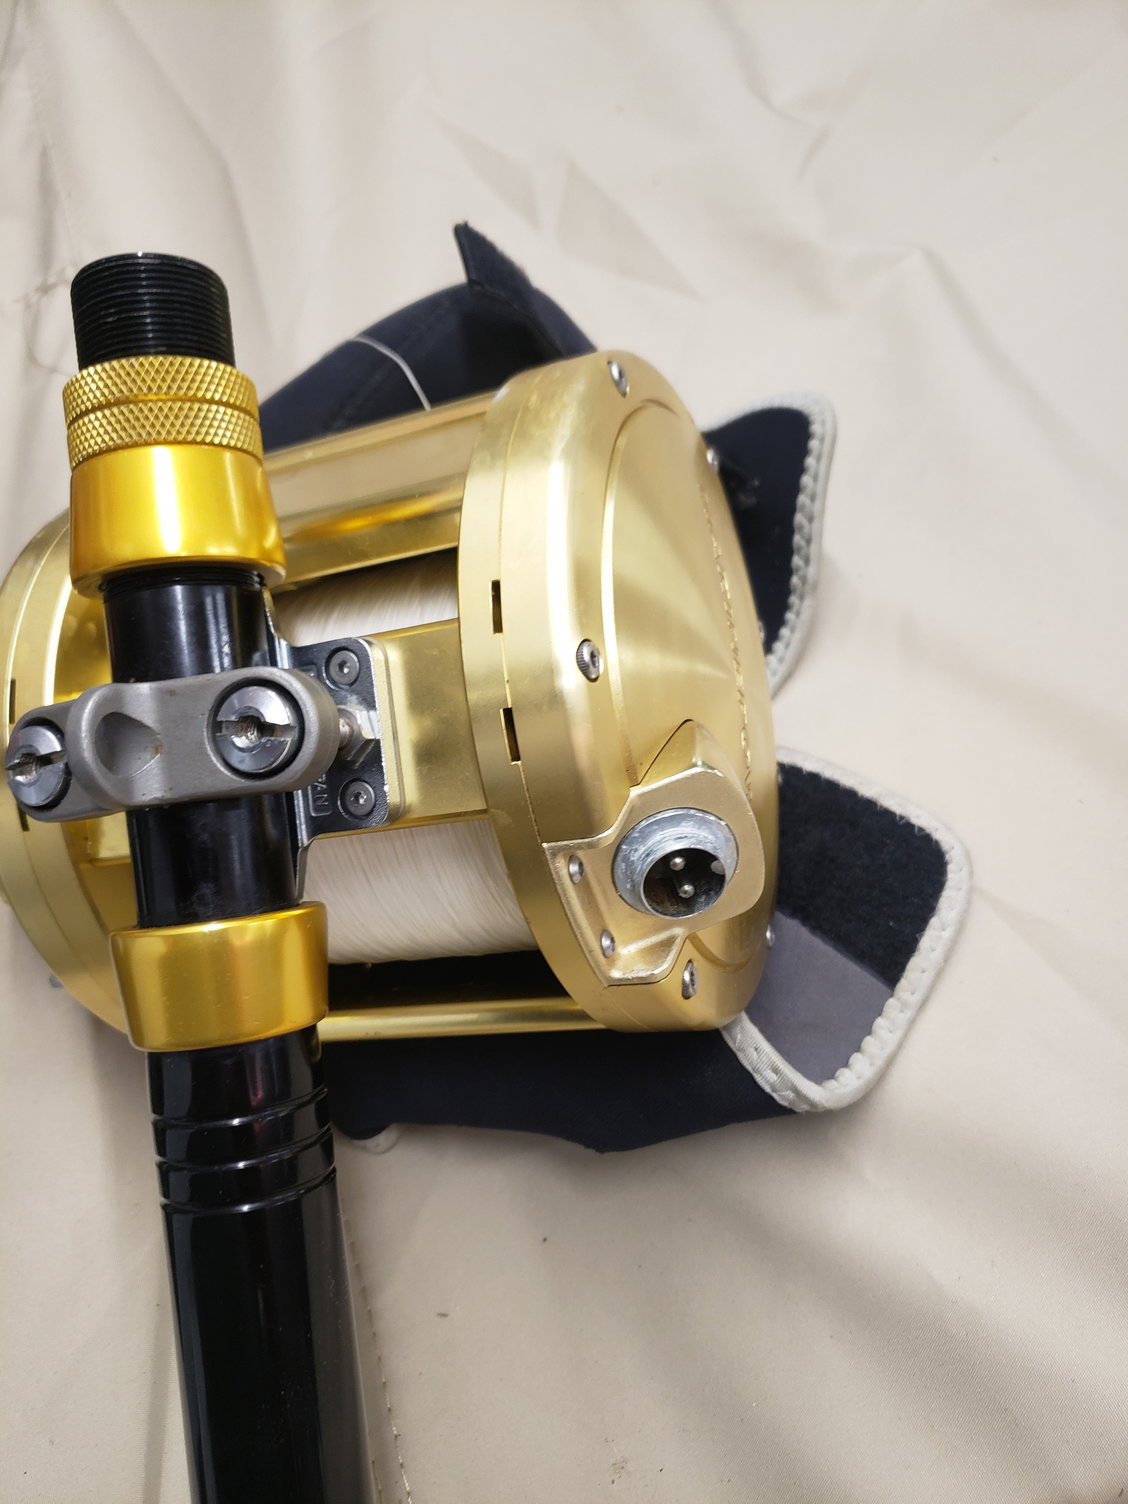 Banax K1000 Electric Fishing Reels - US Sales & Service - The Hull Truth -  Boating and Fishing Forum